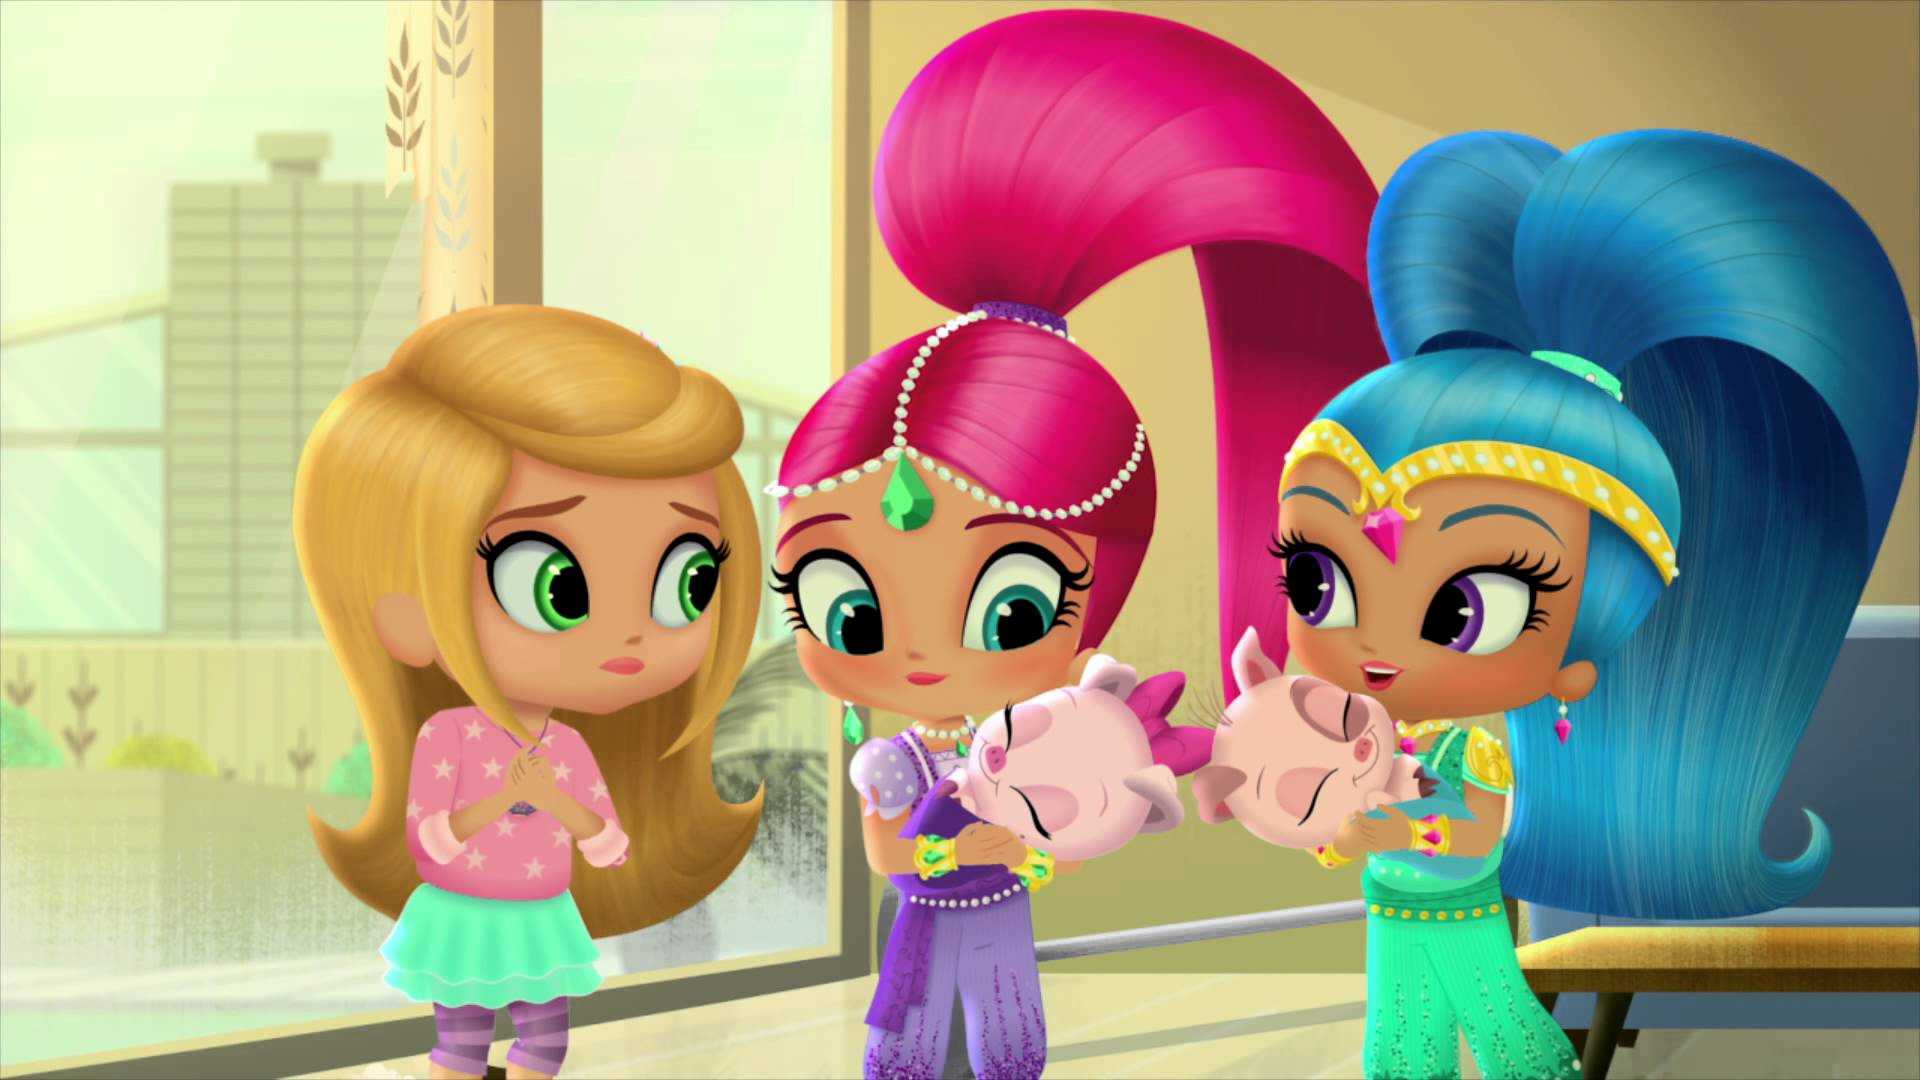 Best Shimmer and Shine PNG, Wallpaper, Clipart, Vector & GIF [2019]